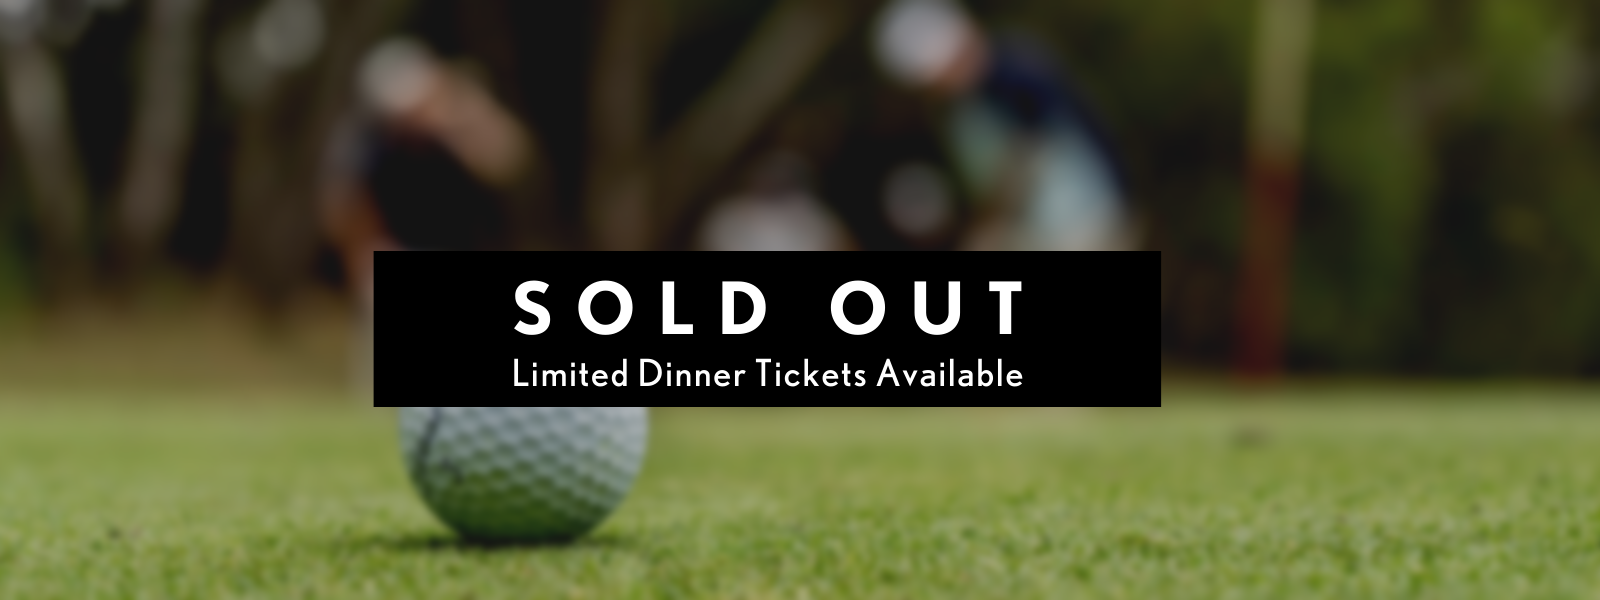 CREW YVR Events Golf Tournament Sold Out 2022 08 26 W 2